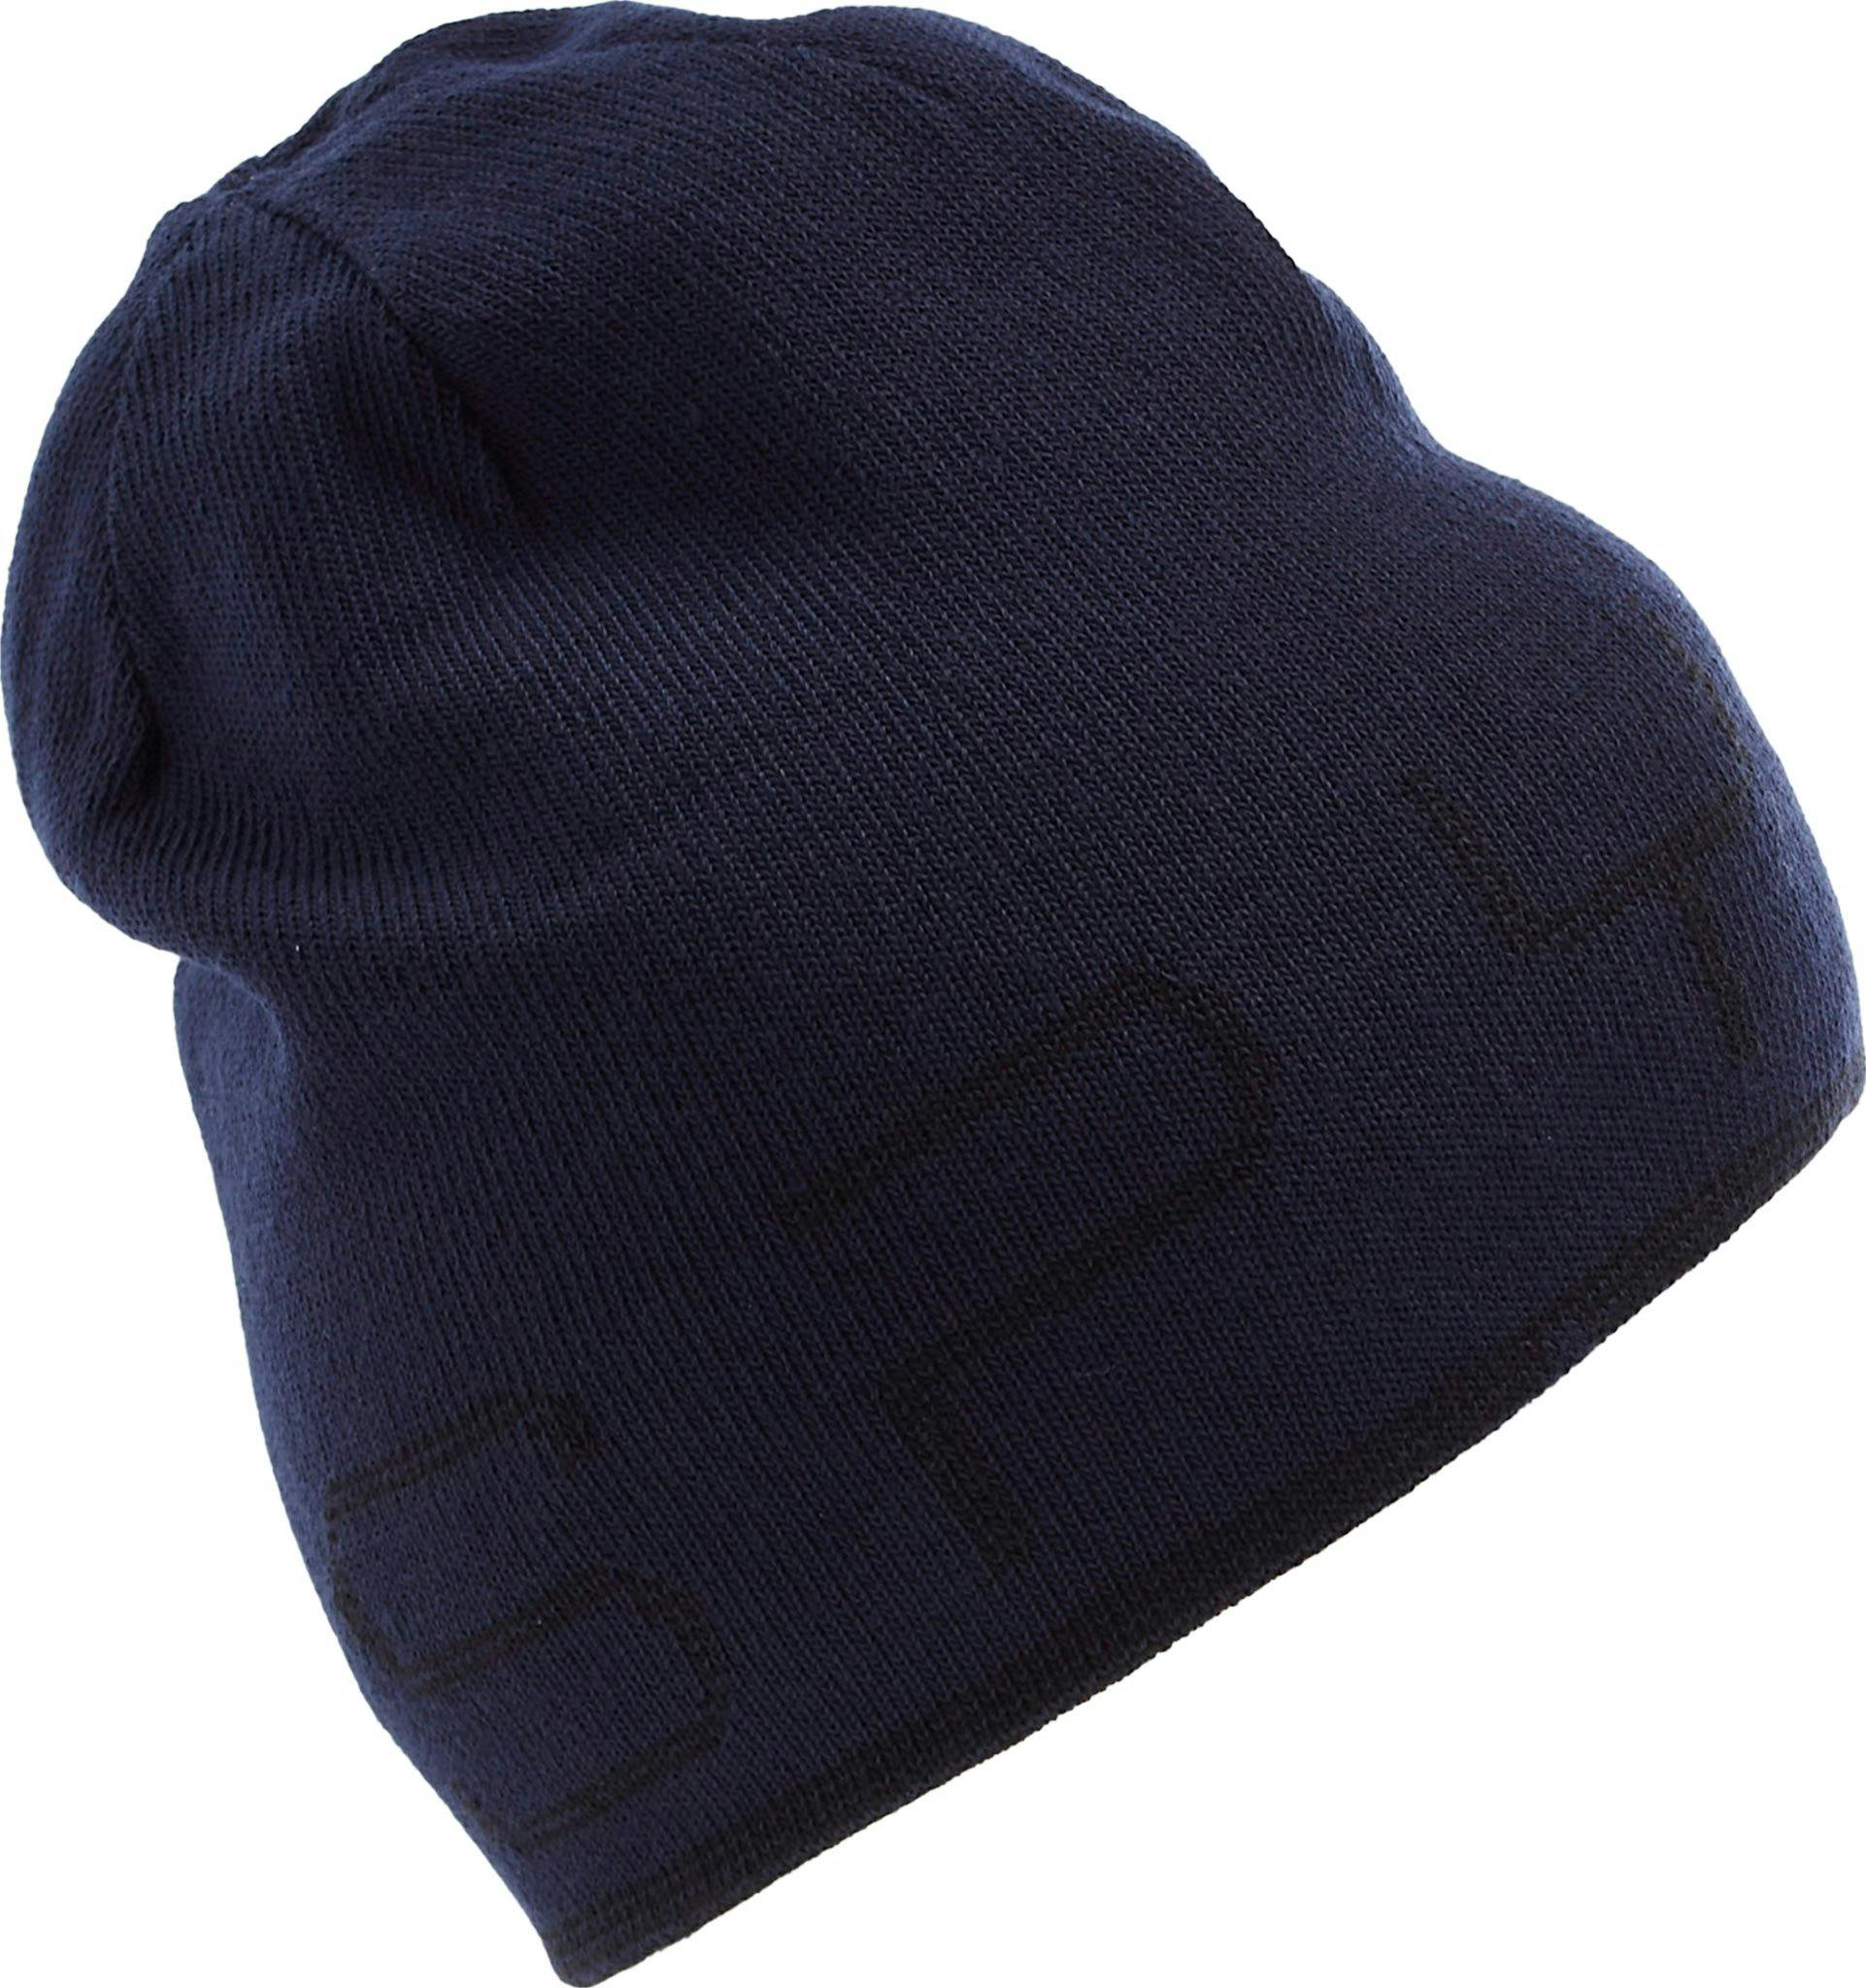 Product image for Reversible Bug Beanie - Boys